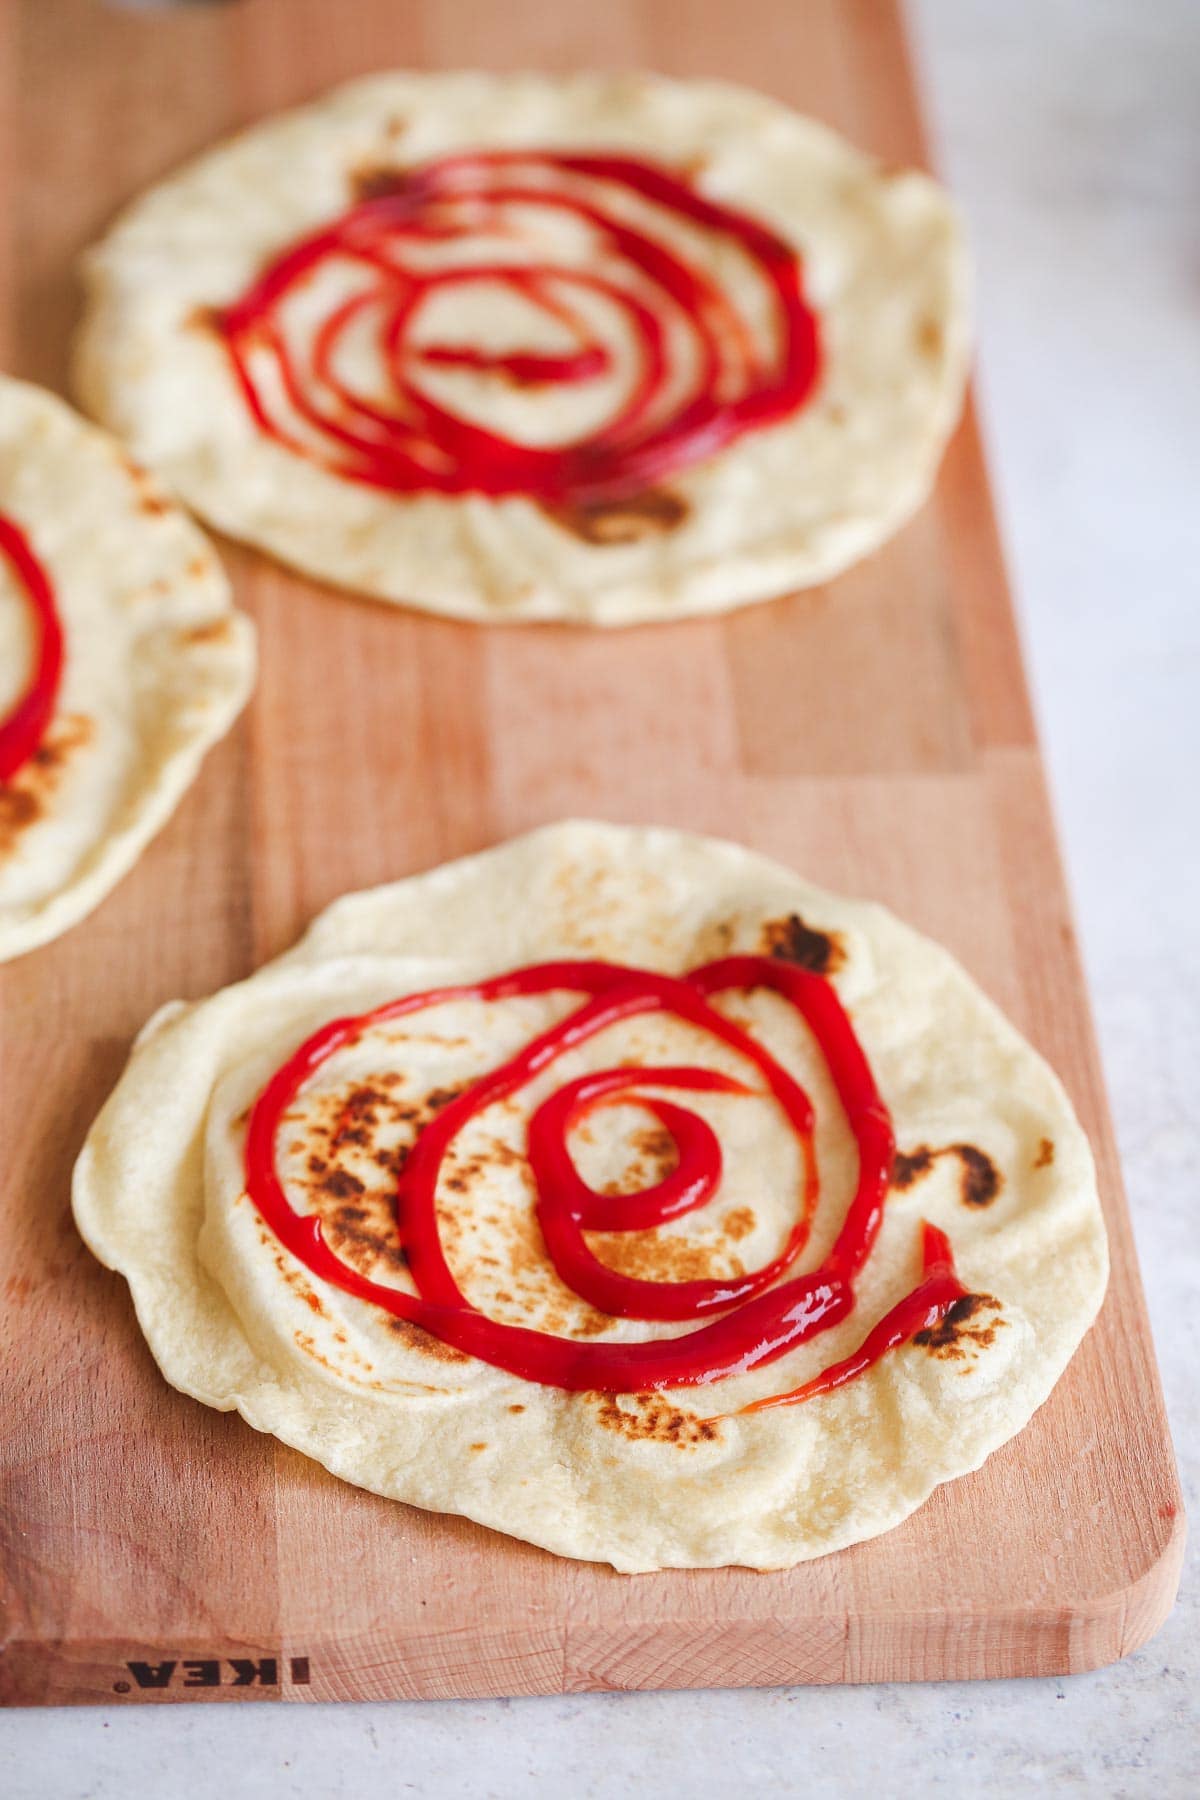 Flatbread with ketchup on top, laid on an IKEA wooden chopping board